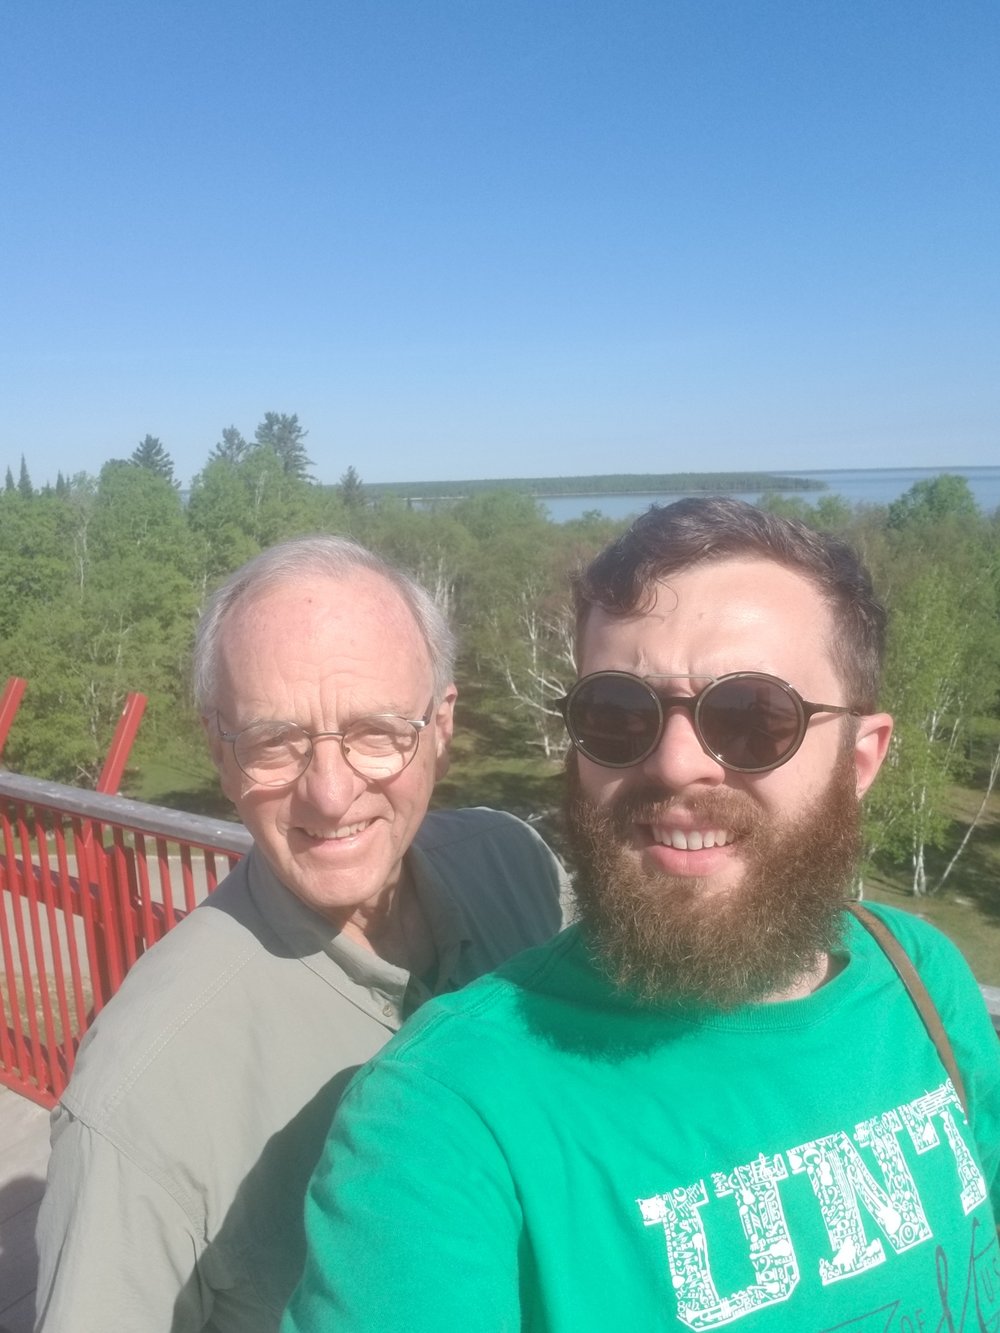 At the overlook - Hecla Lake, MB